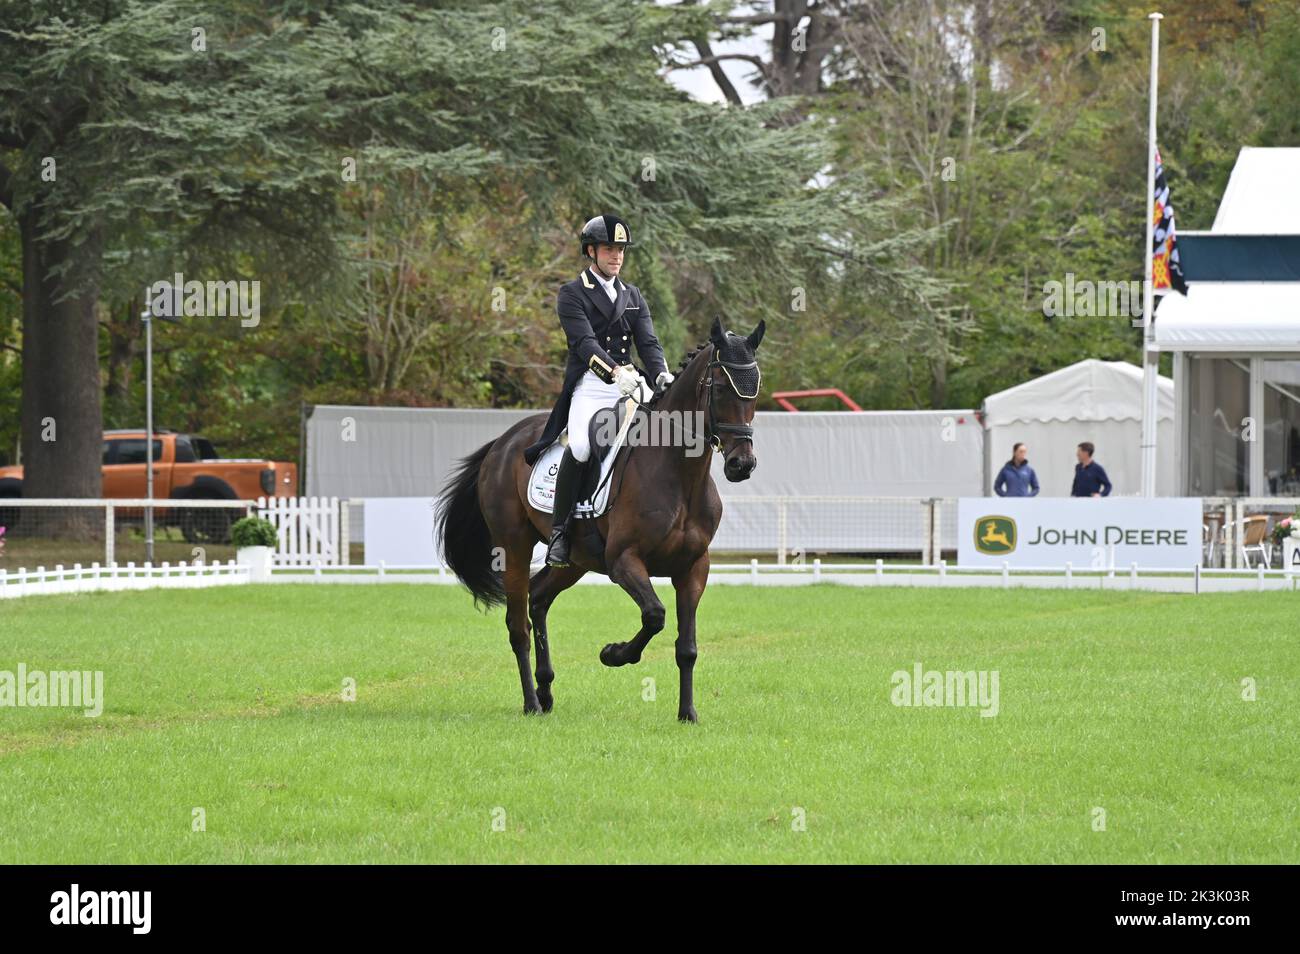 Roberto Scalisi on Alamein dressage phase of the CCI4*-L compettion, Blenheim Palace International Horse Trials, Blenheim Palace, Woodstock, Oxfordshi Stock Photo